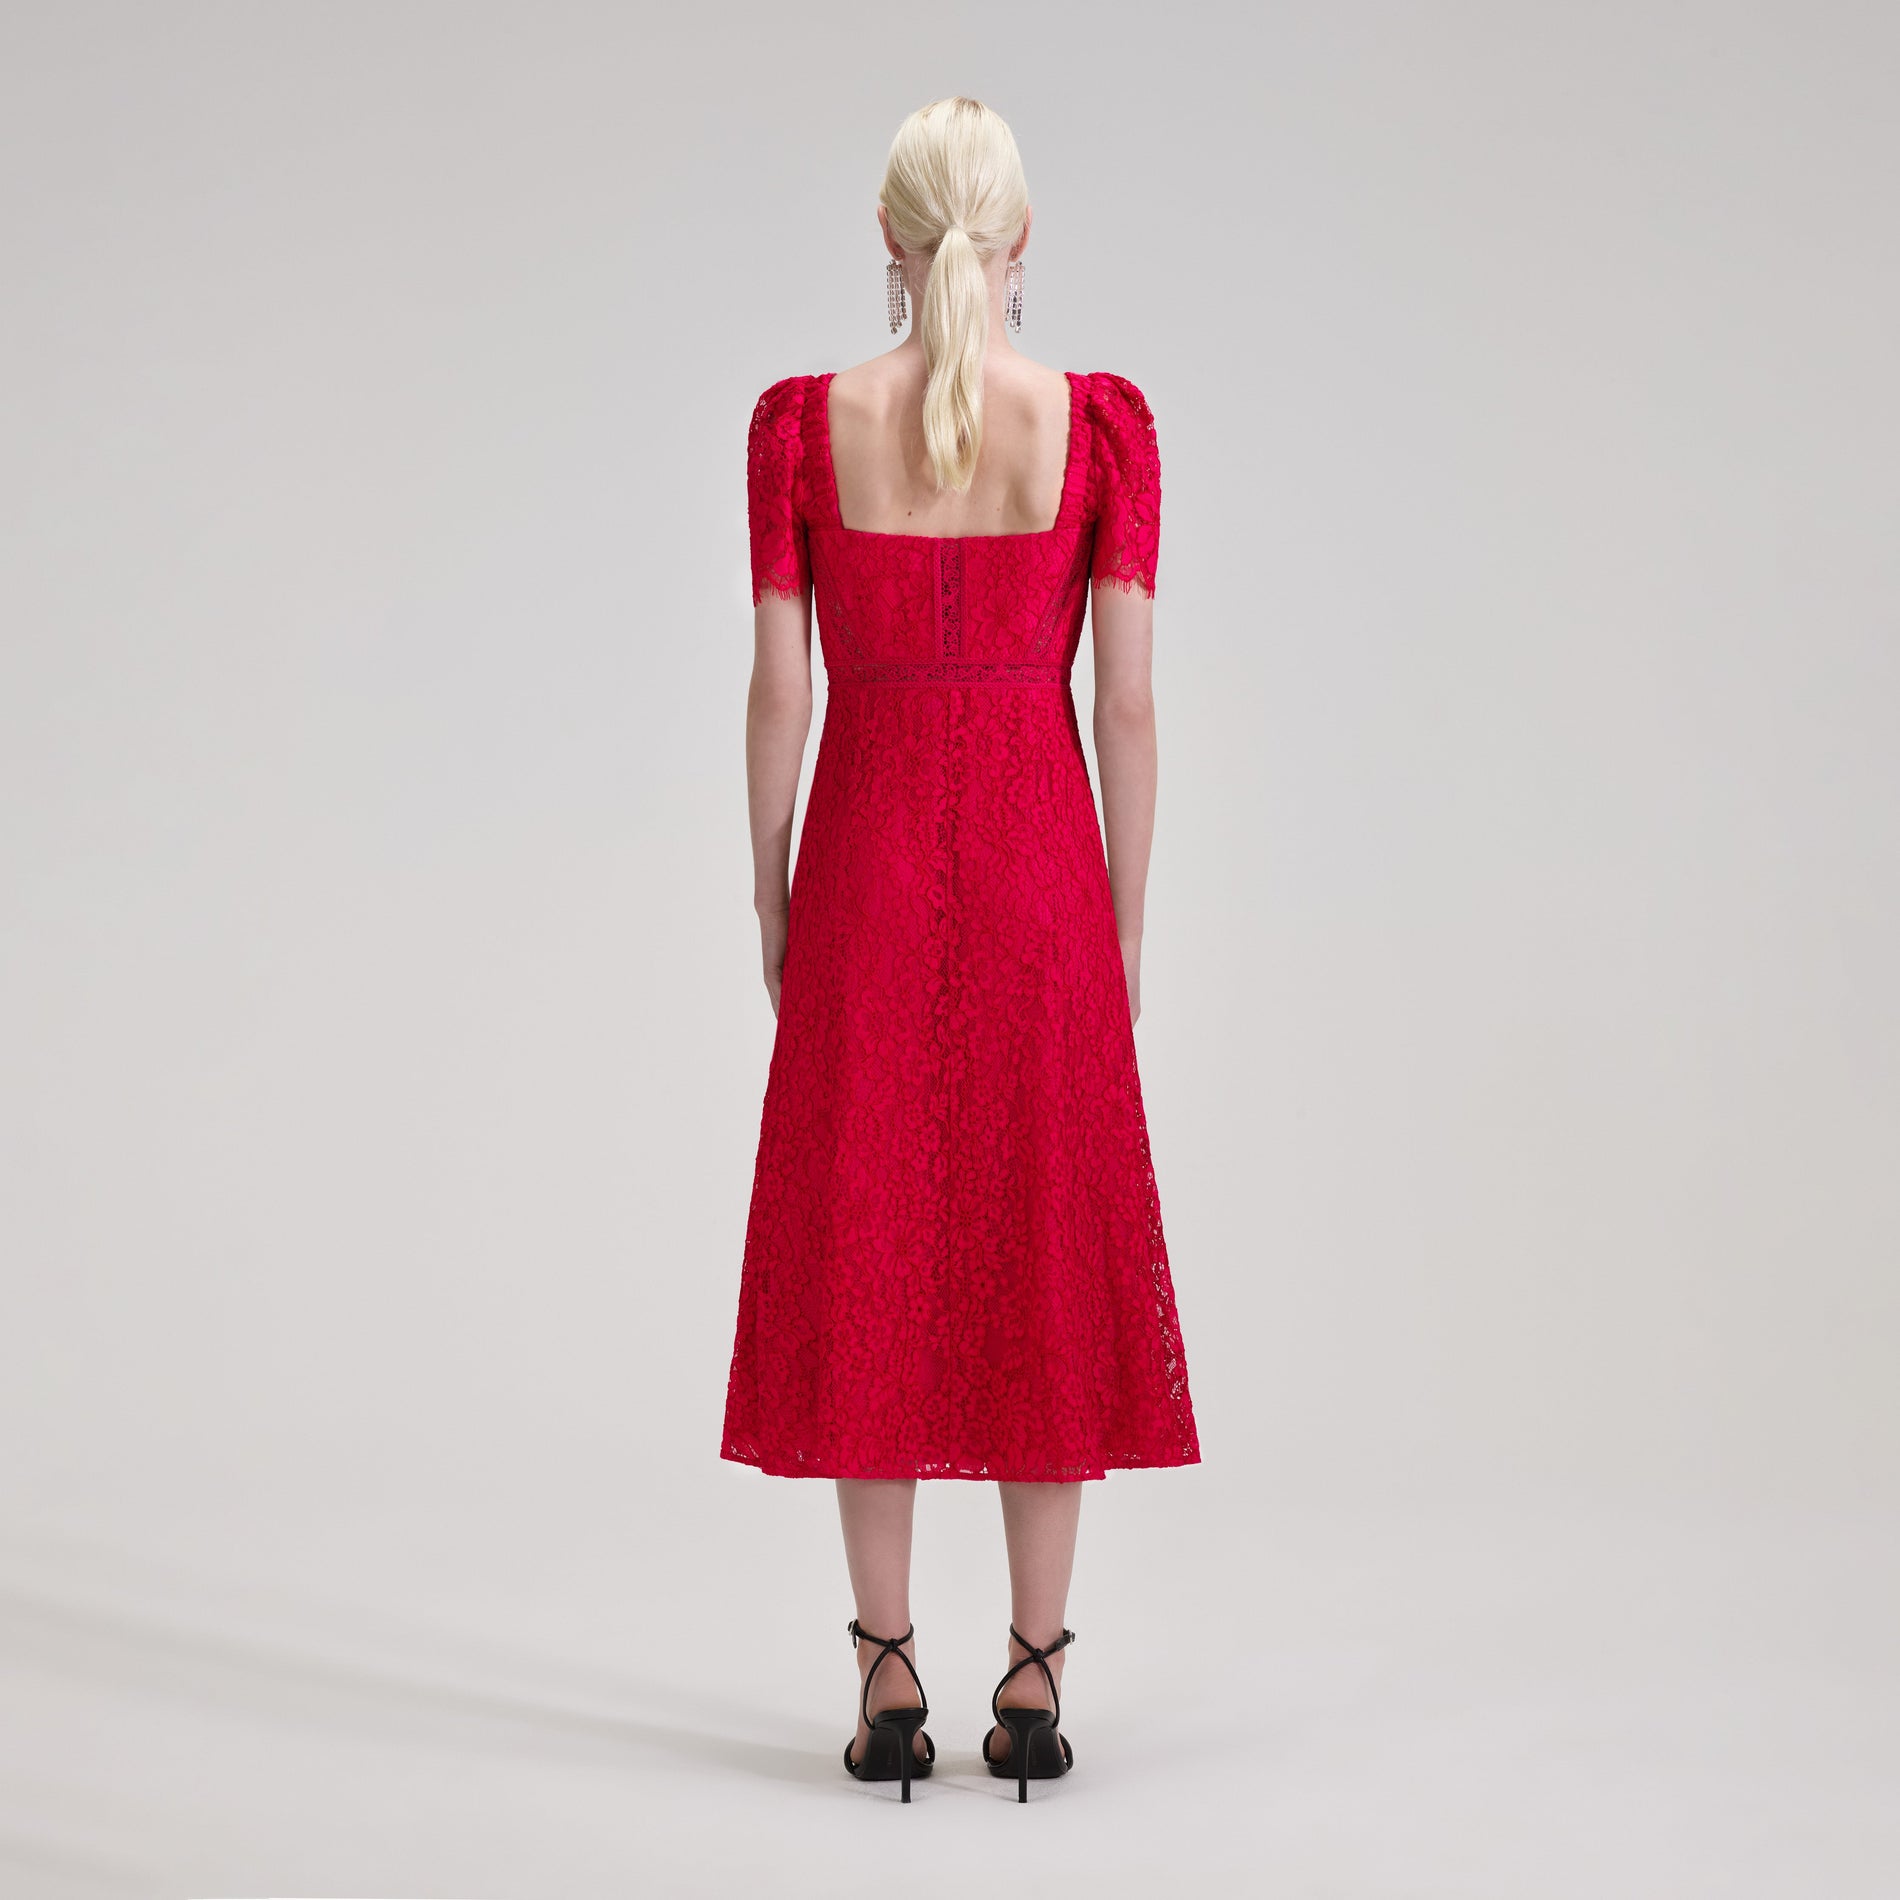 A woman wearing the Red Lace Midi Dress